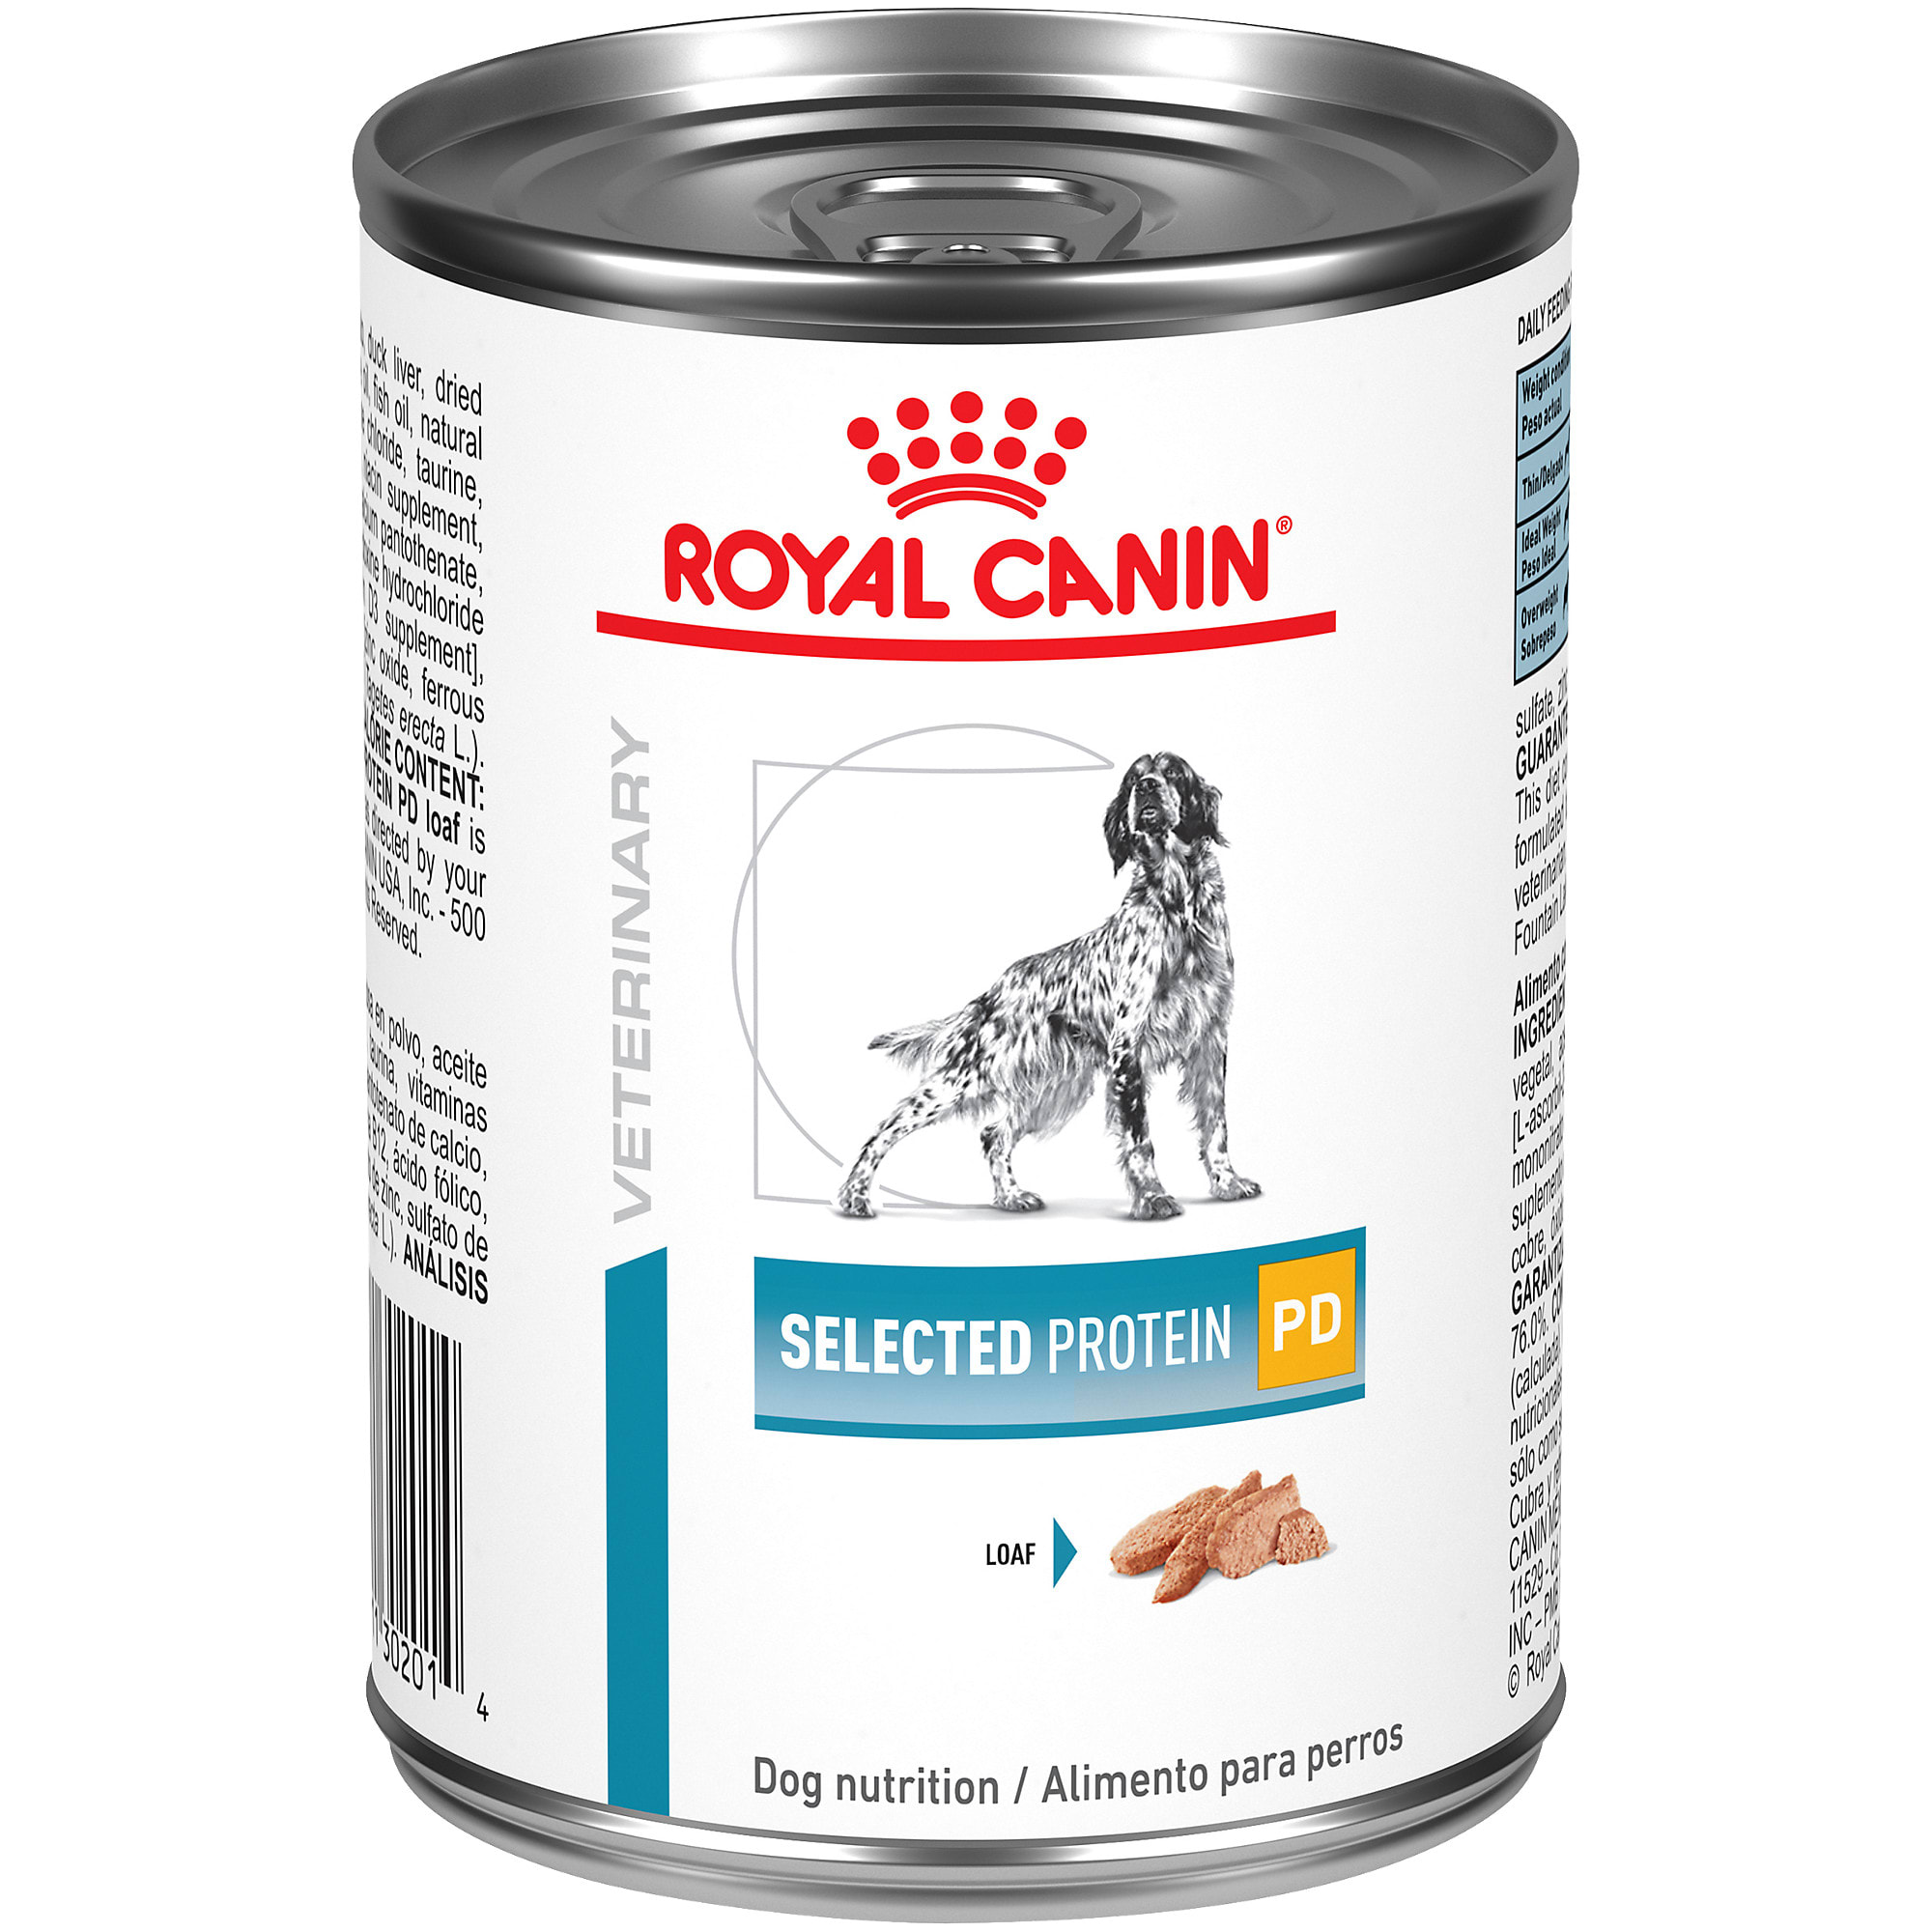 royal canin duck and tapioca